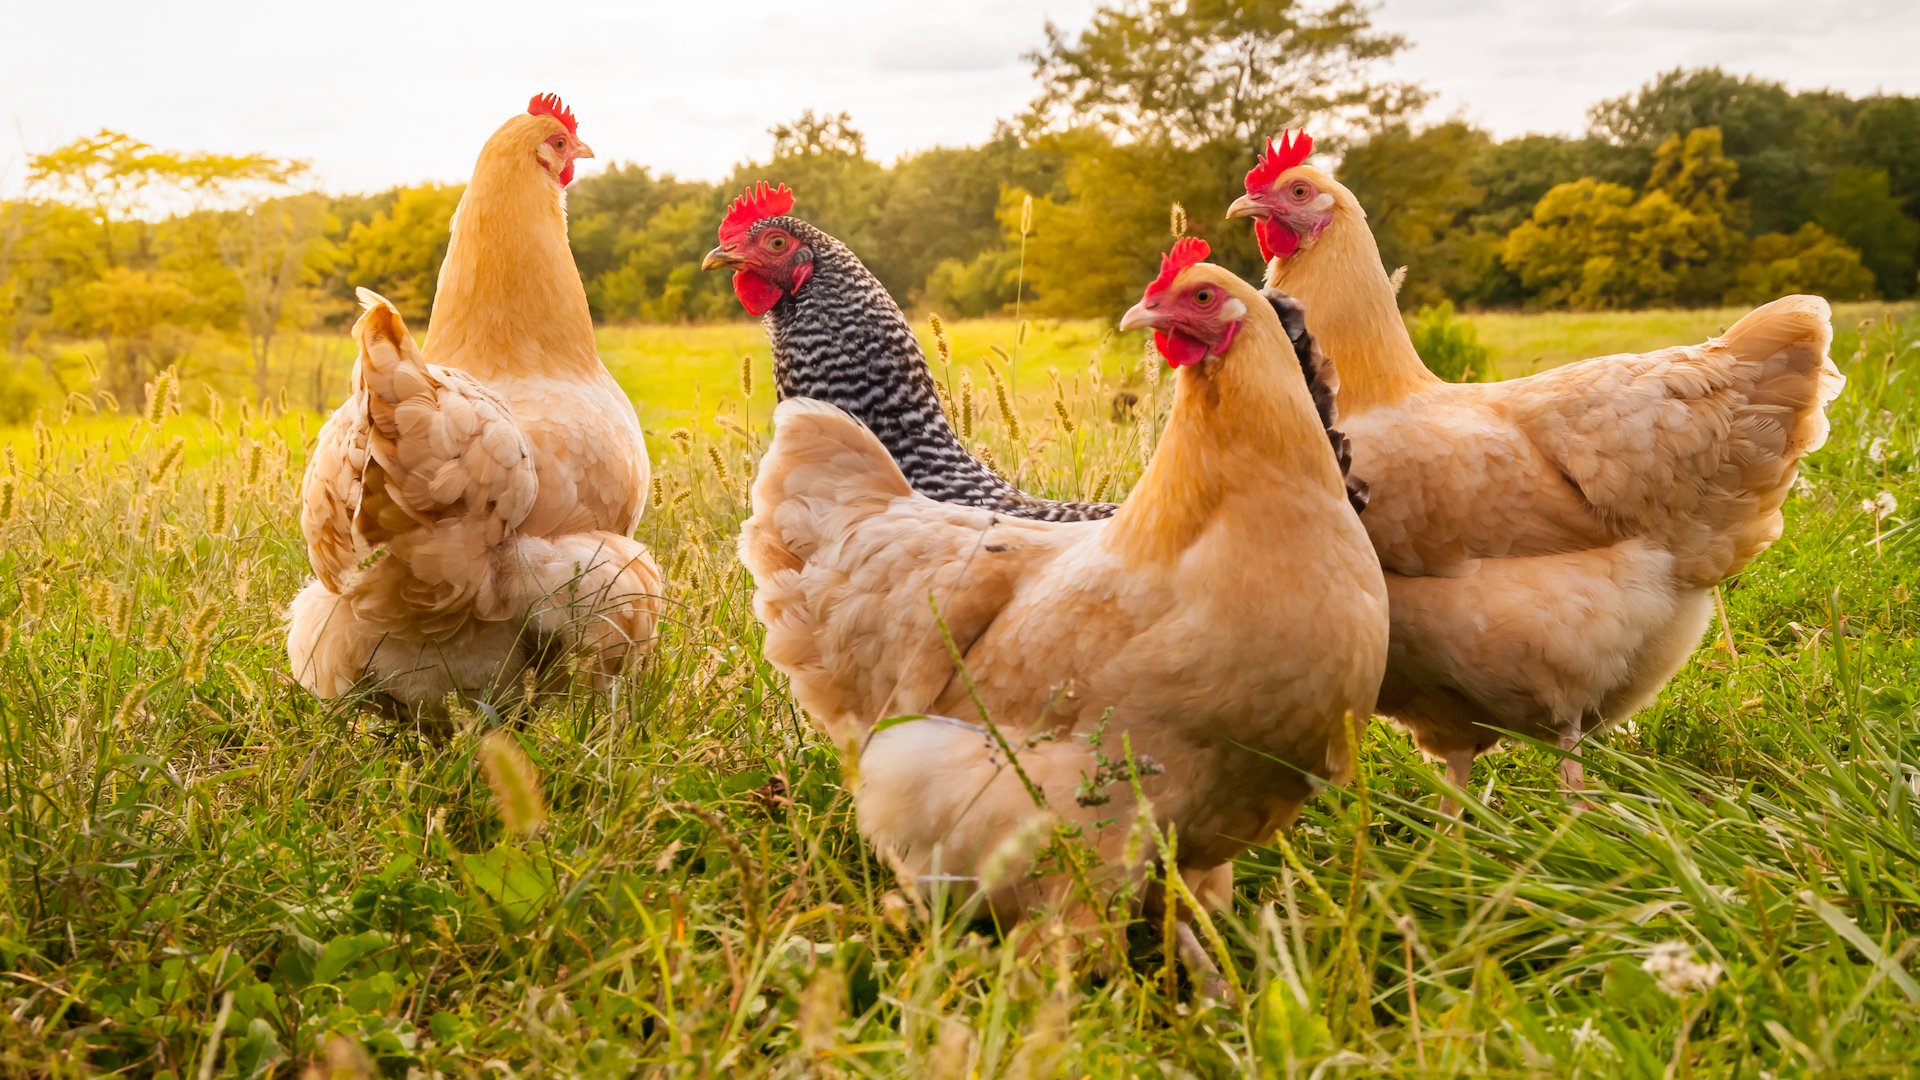 A group of chickens in a field